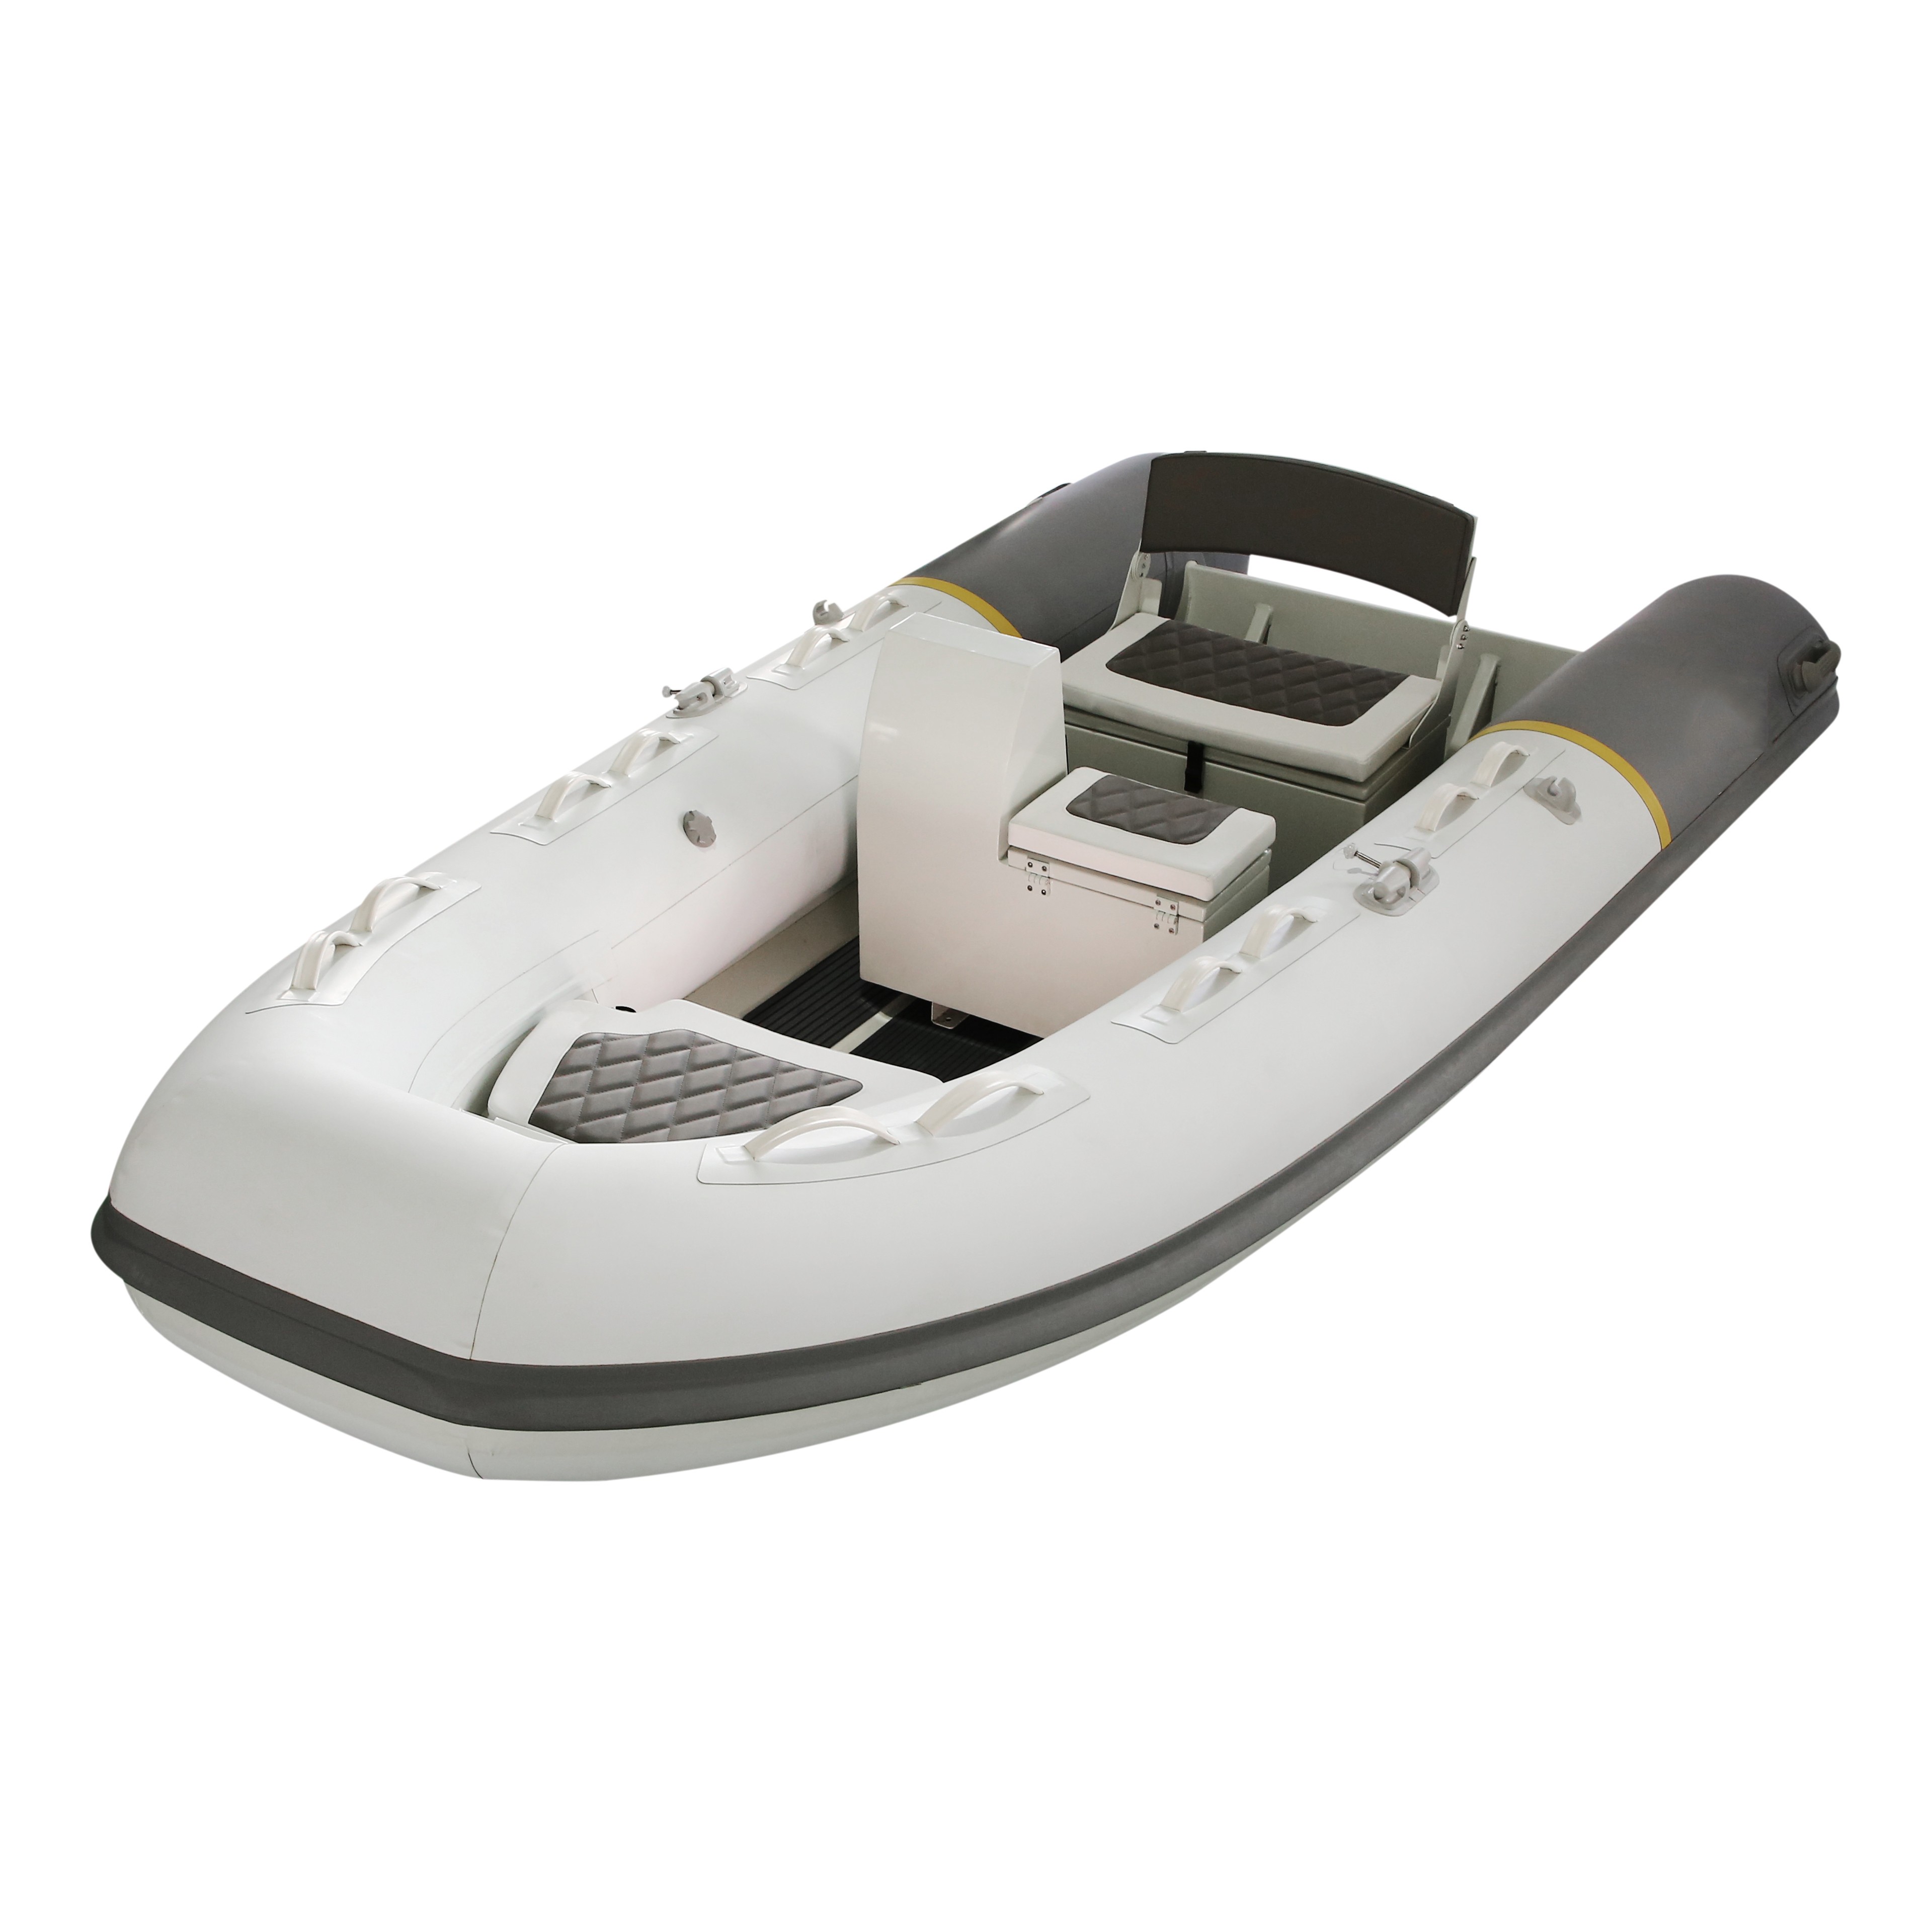 Rib boats for sale near me with top quality and distribution price